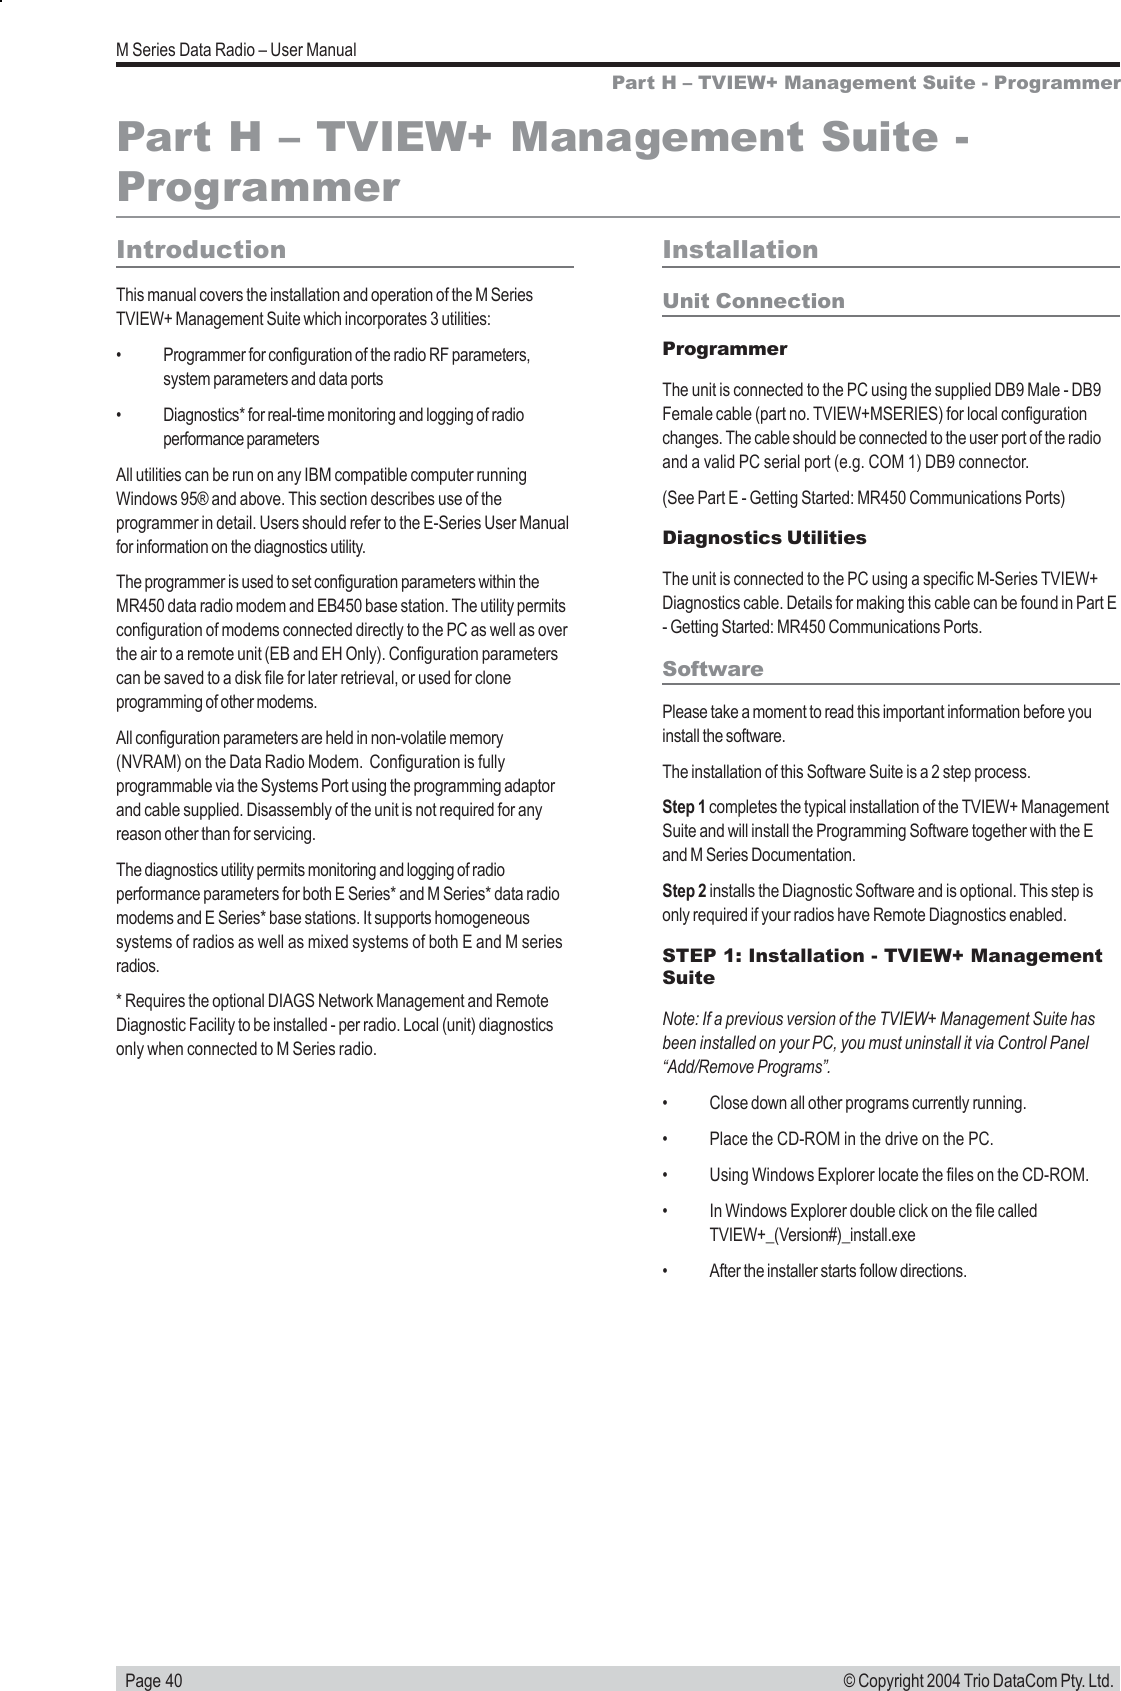   Page 40M Series Data Radio – User Manual© Copyright 2004 Trio DataCom Pty. Ltd.Part H – TVIEW+ Management Suite - ProgrammerPart H – TVIEW+ Management Suite -ProgrammerIntroductionThis manual covers the installation and operation of the M SeriesTVIEW+ Management Suite which incorporates 3 utilities:• Programmer for configuration of the radio RF parameters,system parameters and data ports• Diagnostics* for real-time monitoring and logging of radioperformance parametersAll utilities can be run on any IBM compatible computer runningWindows 95® and above. This section describes use of theprogrammer in detail. Users should refer to the E-Series User Manualfor information on the diagnostics utility.The programmer is used to set configuration parameters within theMR450 data radio modem and EB450 base station. The utility permitsconfiguration of modems connected directly to the PC as well as overthe air to a remote unit (EB and EH Only). Configuration parameterscan be saved to a disk file for later retrieval, or used for cloneprogramming of other modems.All configuration parameters are held in non-volatile memory(NVRAM) on the Data Radio Modem.  Configuration is fullyprogrammable via the Systems Port using the programming adaptorand cable supplied. Disassembly of the unit is not required for anyreason other than for servicing.The diagnostics utility permits monitoring and logging of radioperformance parameters for both E Series* and M Series* data radiomodems and E Series* base stations. It supports homogeneoussystems of radios as well as mixed systems of both E and M seriesradios.* Requires the optional DIAGS Network Management and RemoteDiagnostic Facility to be installed - per radio. Local (unit) diagnosticsonly when connected to M Series radio.InstallationUnit ConnectionProgrammerThe unit is connected to the PC using the supplied DB9 Male - DB9Female cable (part no. TVIEW+MSERIES) for local configurationchanges. The cable should be connected to the user port of the radioand a valid PC serial port (e.g. COM 1) DB9 connector.(See Part E - Getting Started: MR450 Communications Ports)Diagnostics UtilitiesThe unit is connected to the PC using a specific M-Series TVIEW+Diagnostics cable. Details for making this cable can be found in Part E- Getting Started: MR450 Communications Ports.SoftwarePlease take a moment to read this important information before youinstall the software.The installation of this Software Suite is a 2 step process.Step 1 completes the typical installation of the TVIEW+ ManagementSuite and will install the Programming Software together with the Eand M Series Documentation.Step 2 installs the Diagnostic Software and is optional. This step isonly required if your radios have Remote Diagnostics enabled.STEP 1: Installation - TVIEW+ ManagementSuiteNote: If a previous version of the TVIEW+ Management Suite hasbeen installed on your PC, you must uninstall it via Control Panel“Add/Remove Programs”.• Close down all other programs currently running.• Place the CD-ROM in the drive on the PC.• Using Windows Explorer locate the files on the CD-ROM.• In Windows Explorer double click on the file calledTVIEW+_(Version#)_install.exe• After the installer starts follow directions.